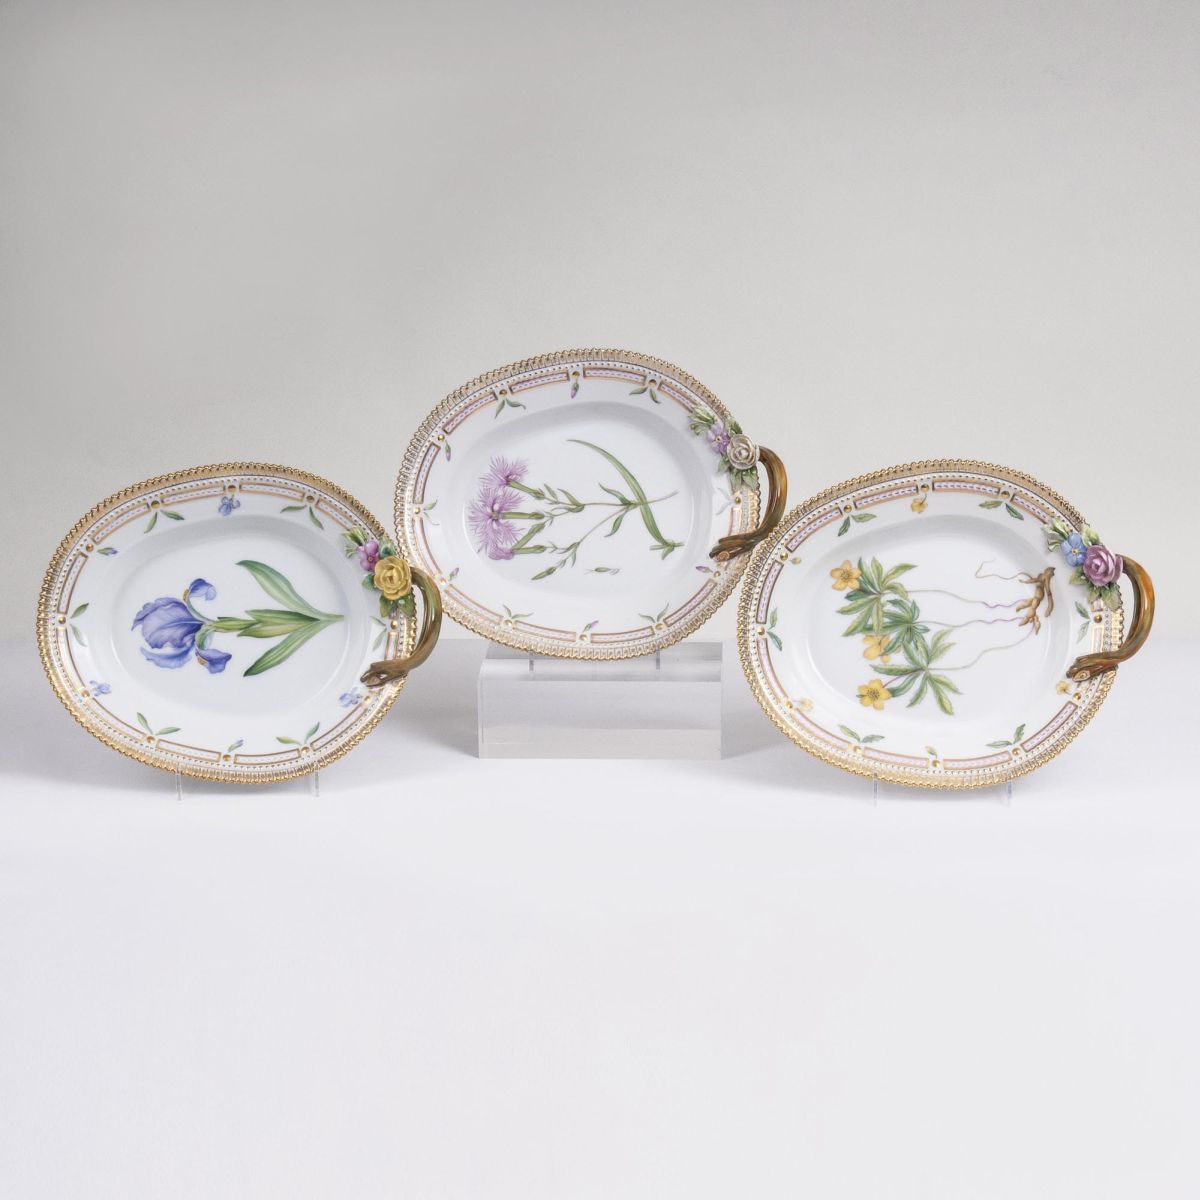 Three oval Flora Danica Dishes with Branch Handles and Botanical Specimens